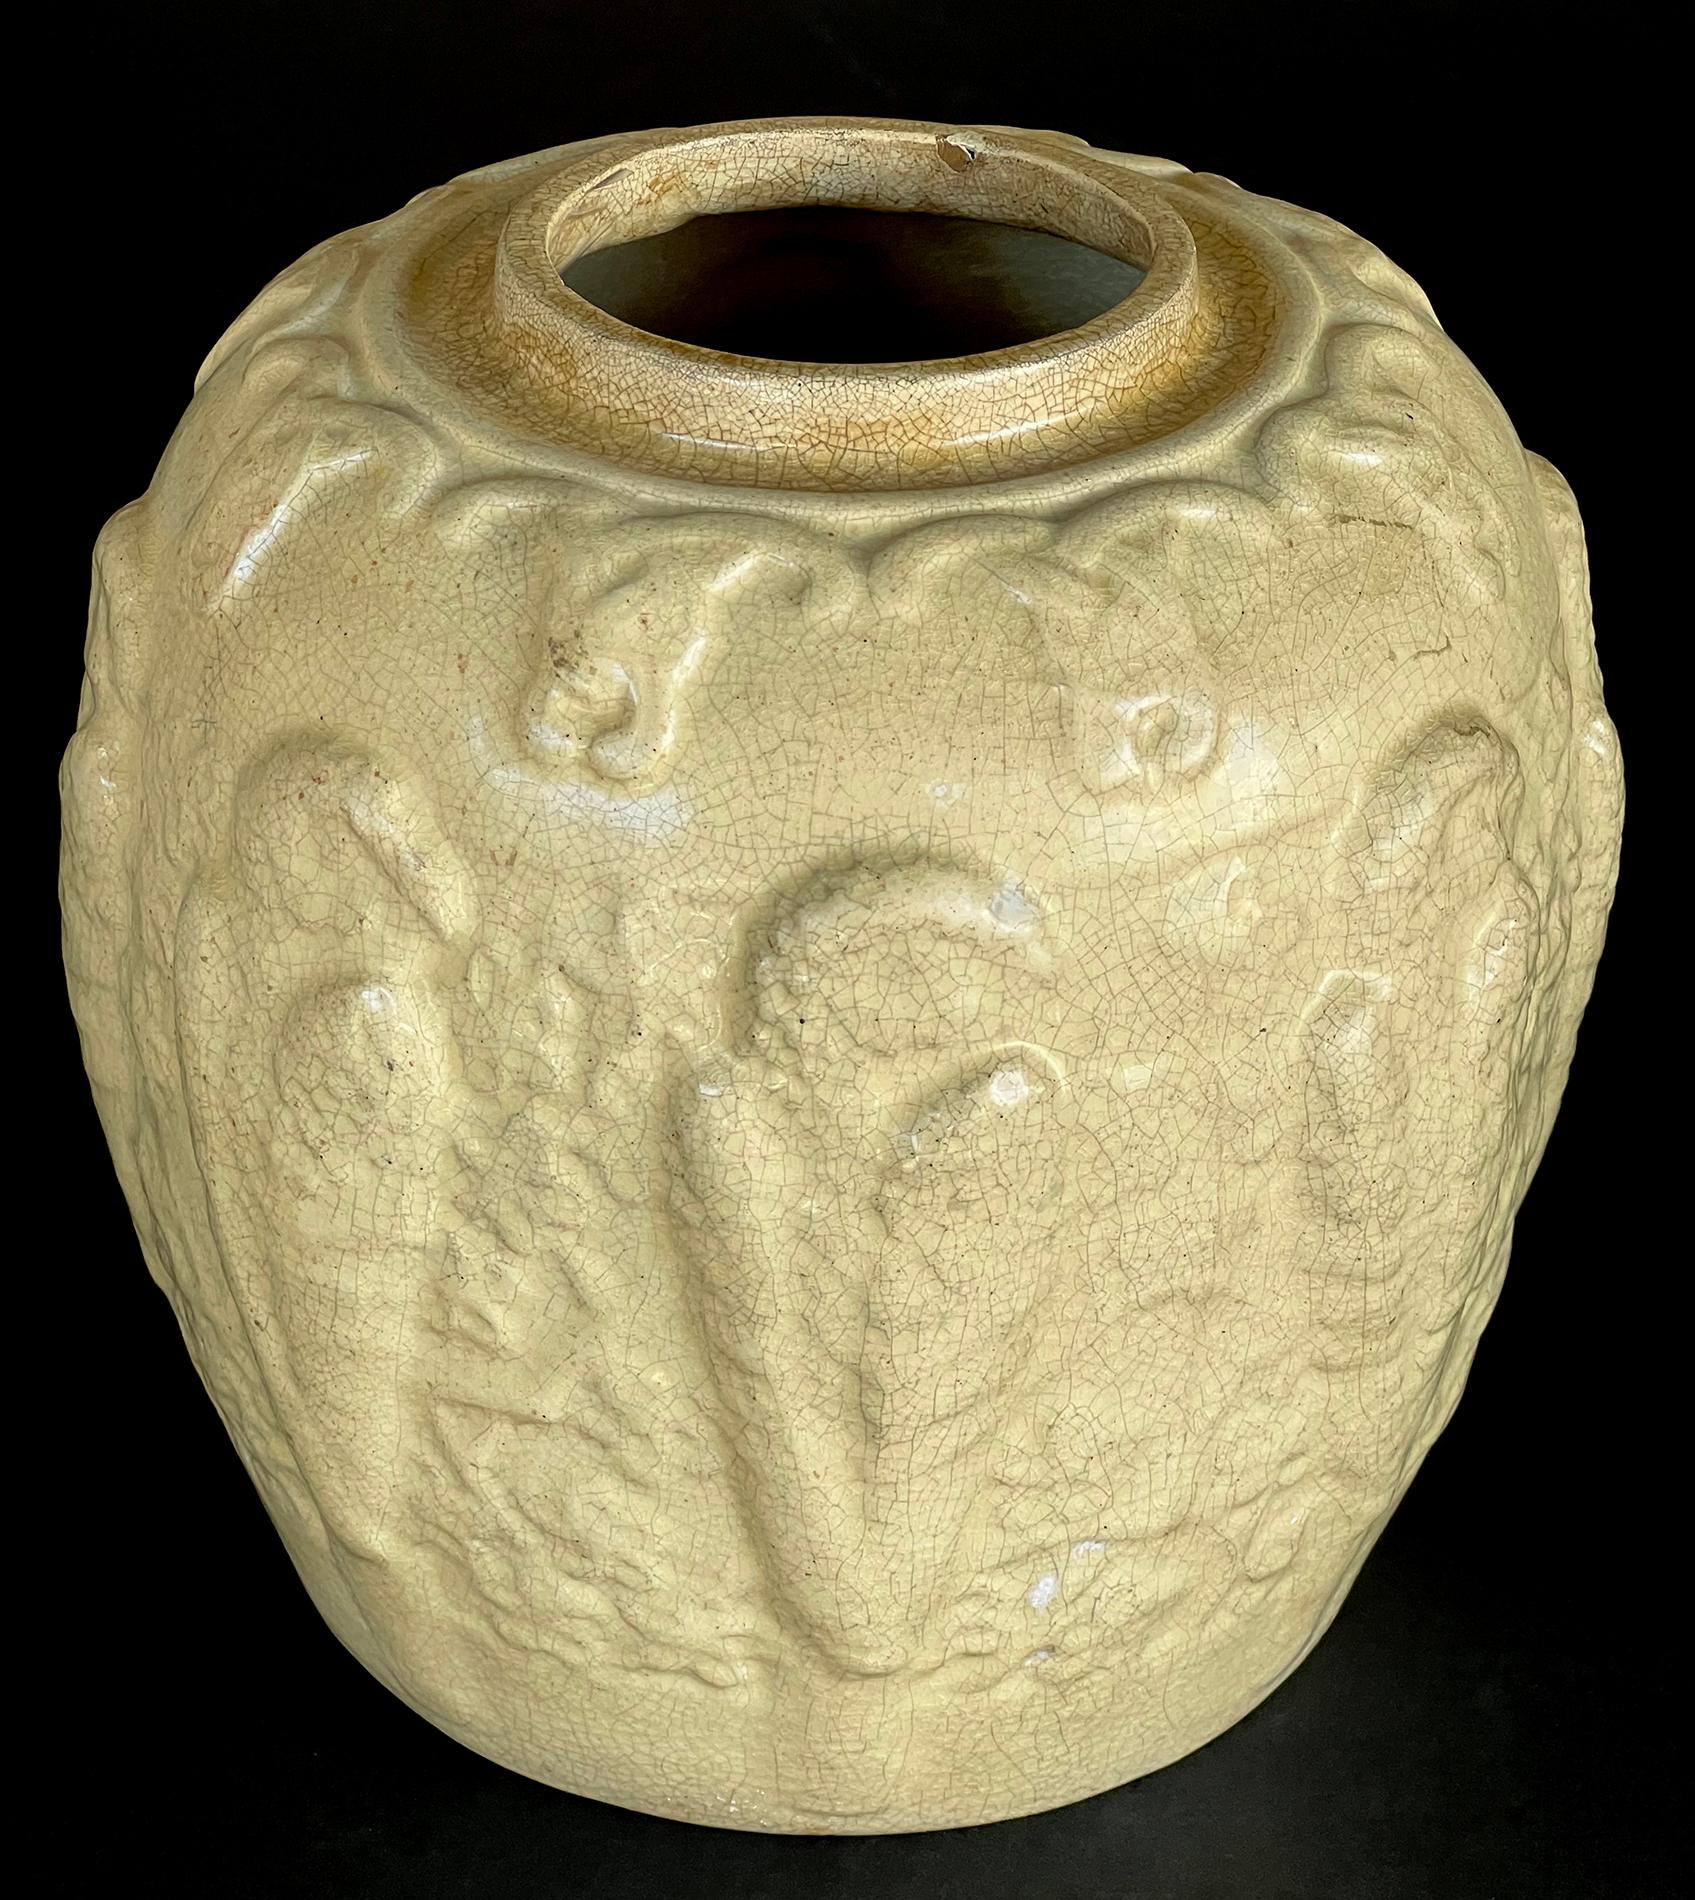 the ovoid pot with short neck above a tapering body adorned with carved relief decoration depicting parrots